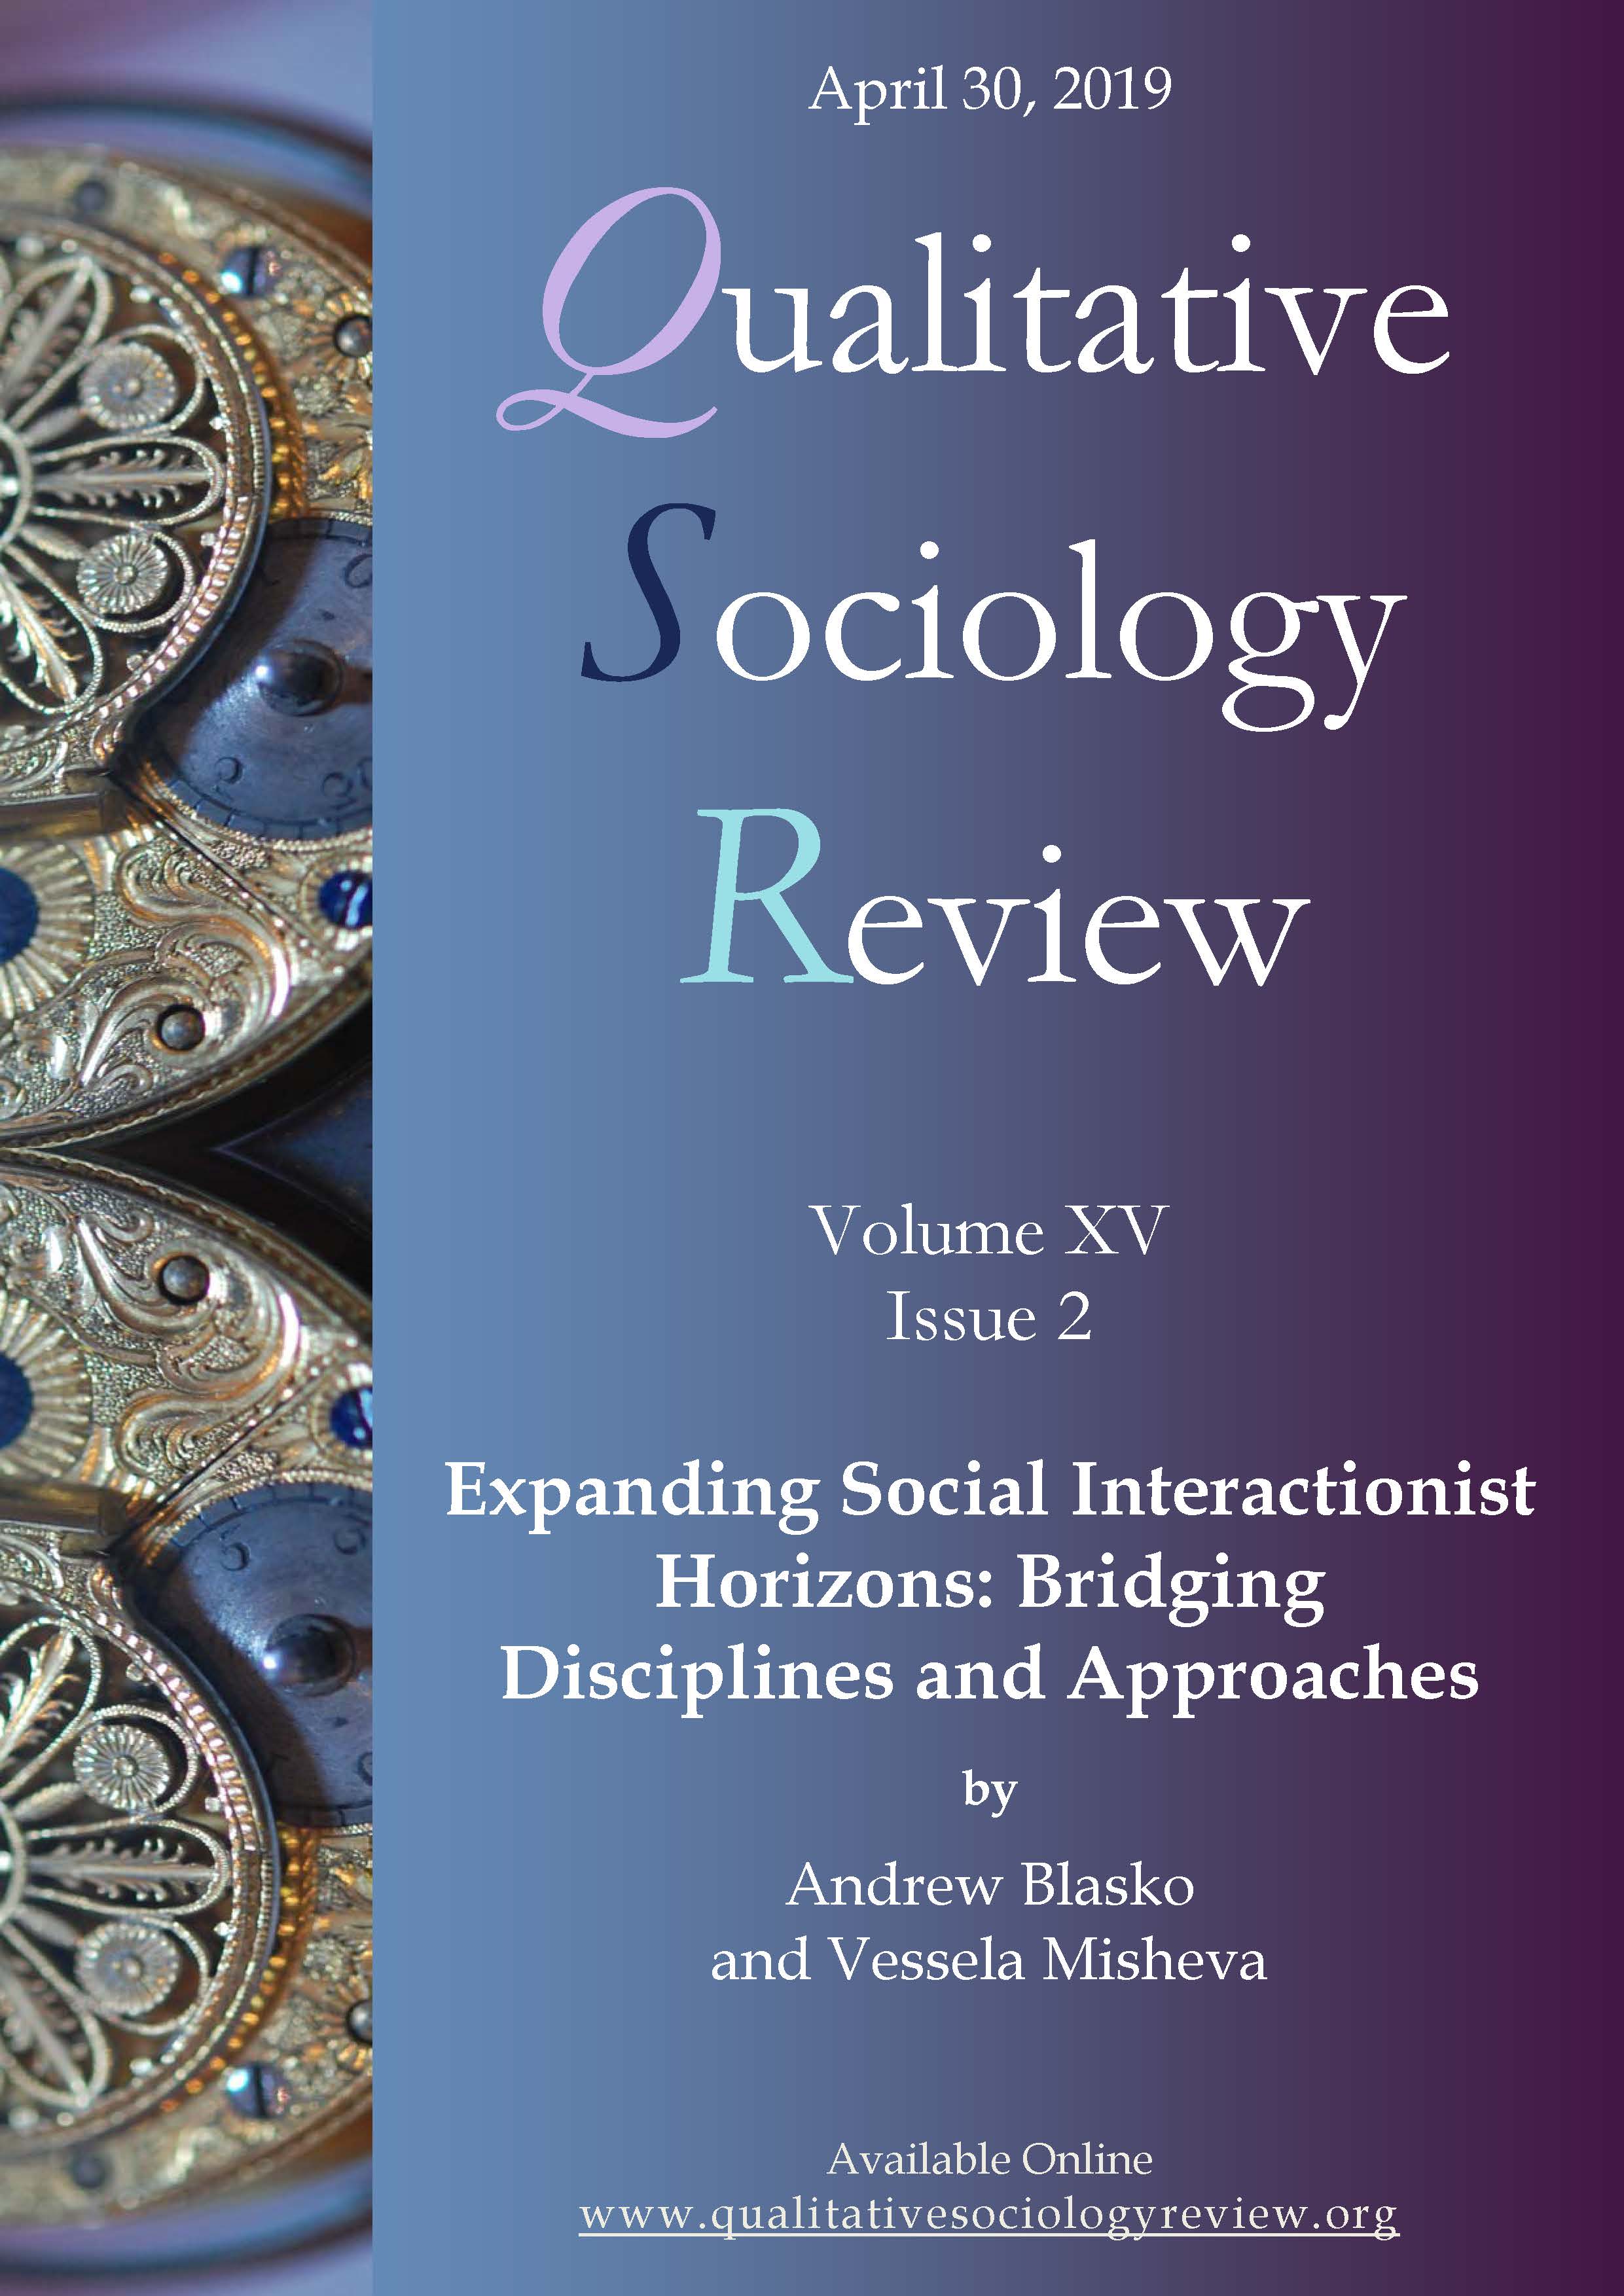 					View Vol. 15 No. 2 (2019): Expanding Social Interactionist Horizons: Bridging Disciplines and Approaches
				